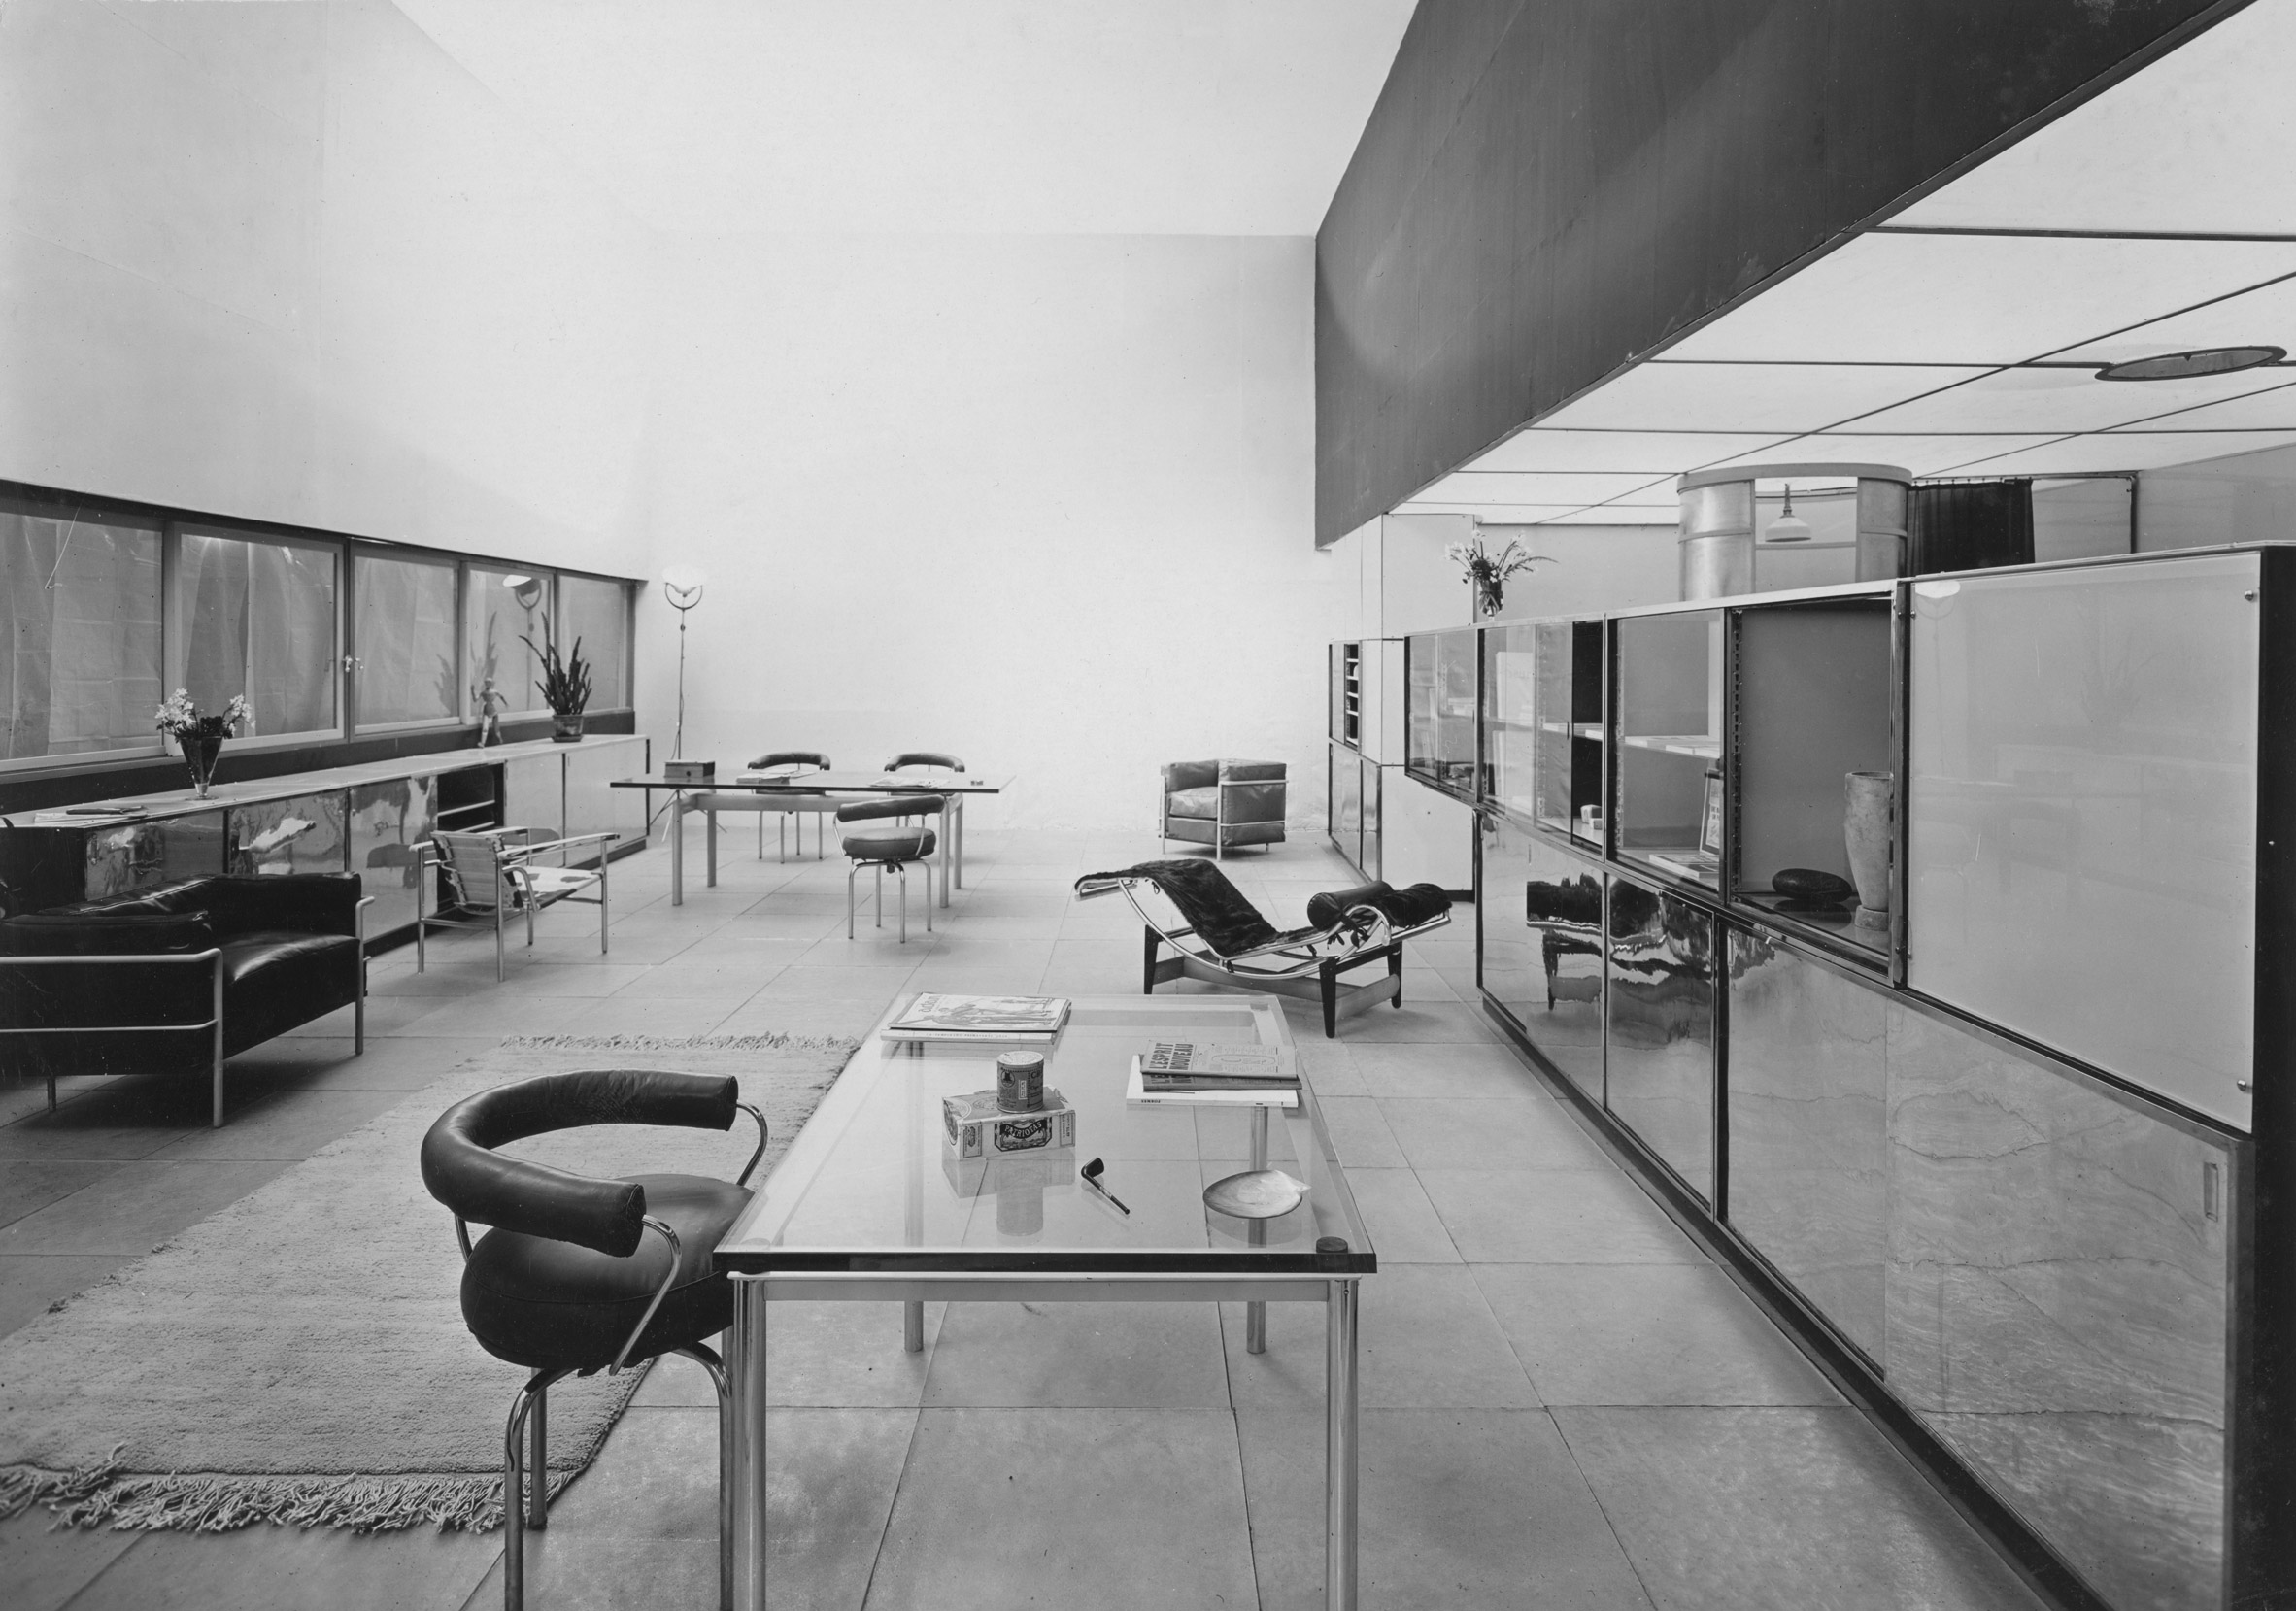 Charlotte Perriand: Inventing a New World, The Fondation Louis